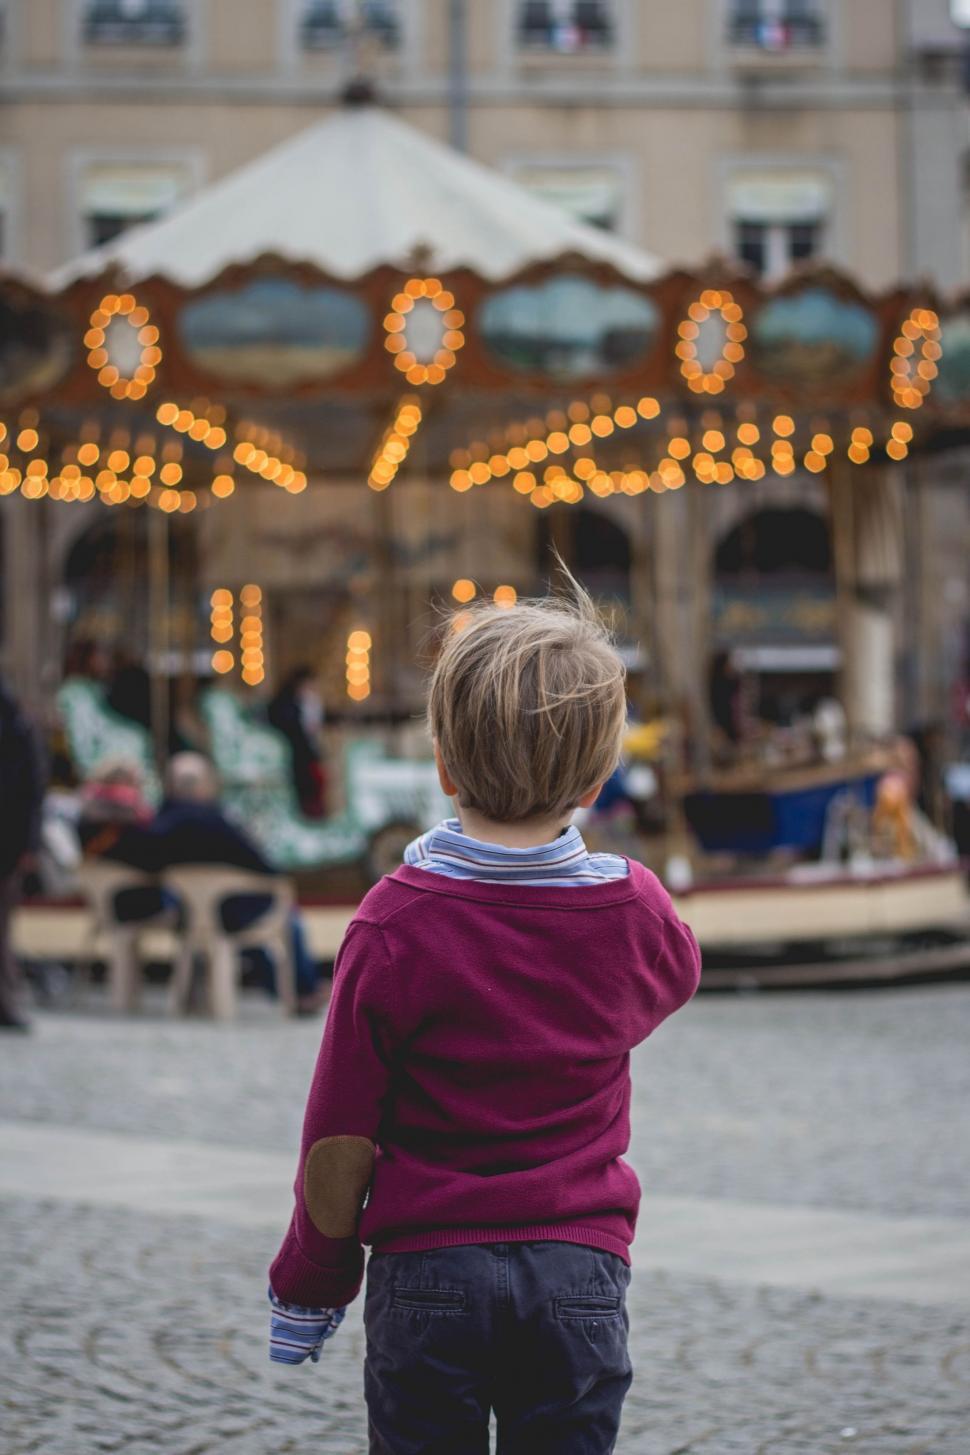 Free Image of Little Boy Standing in Front of Merry Go Round 